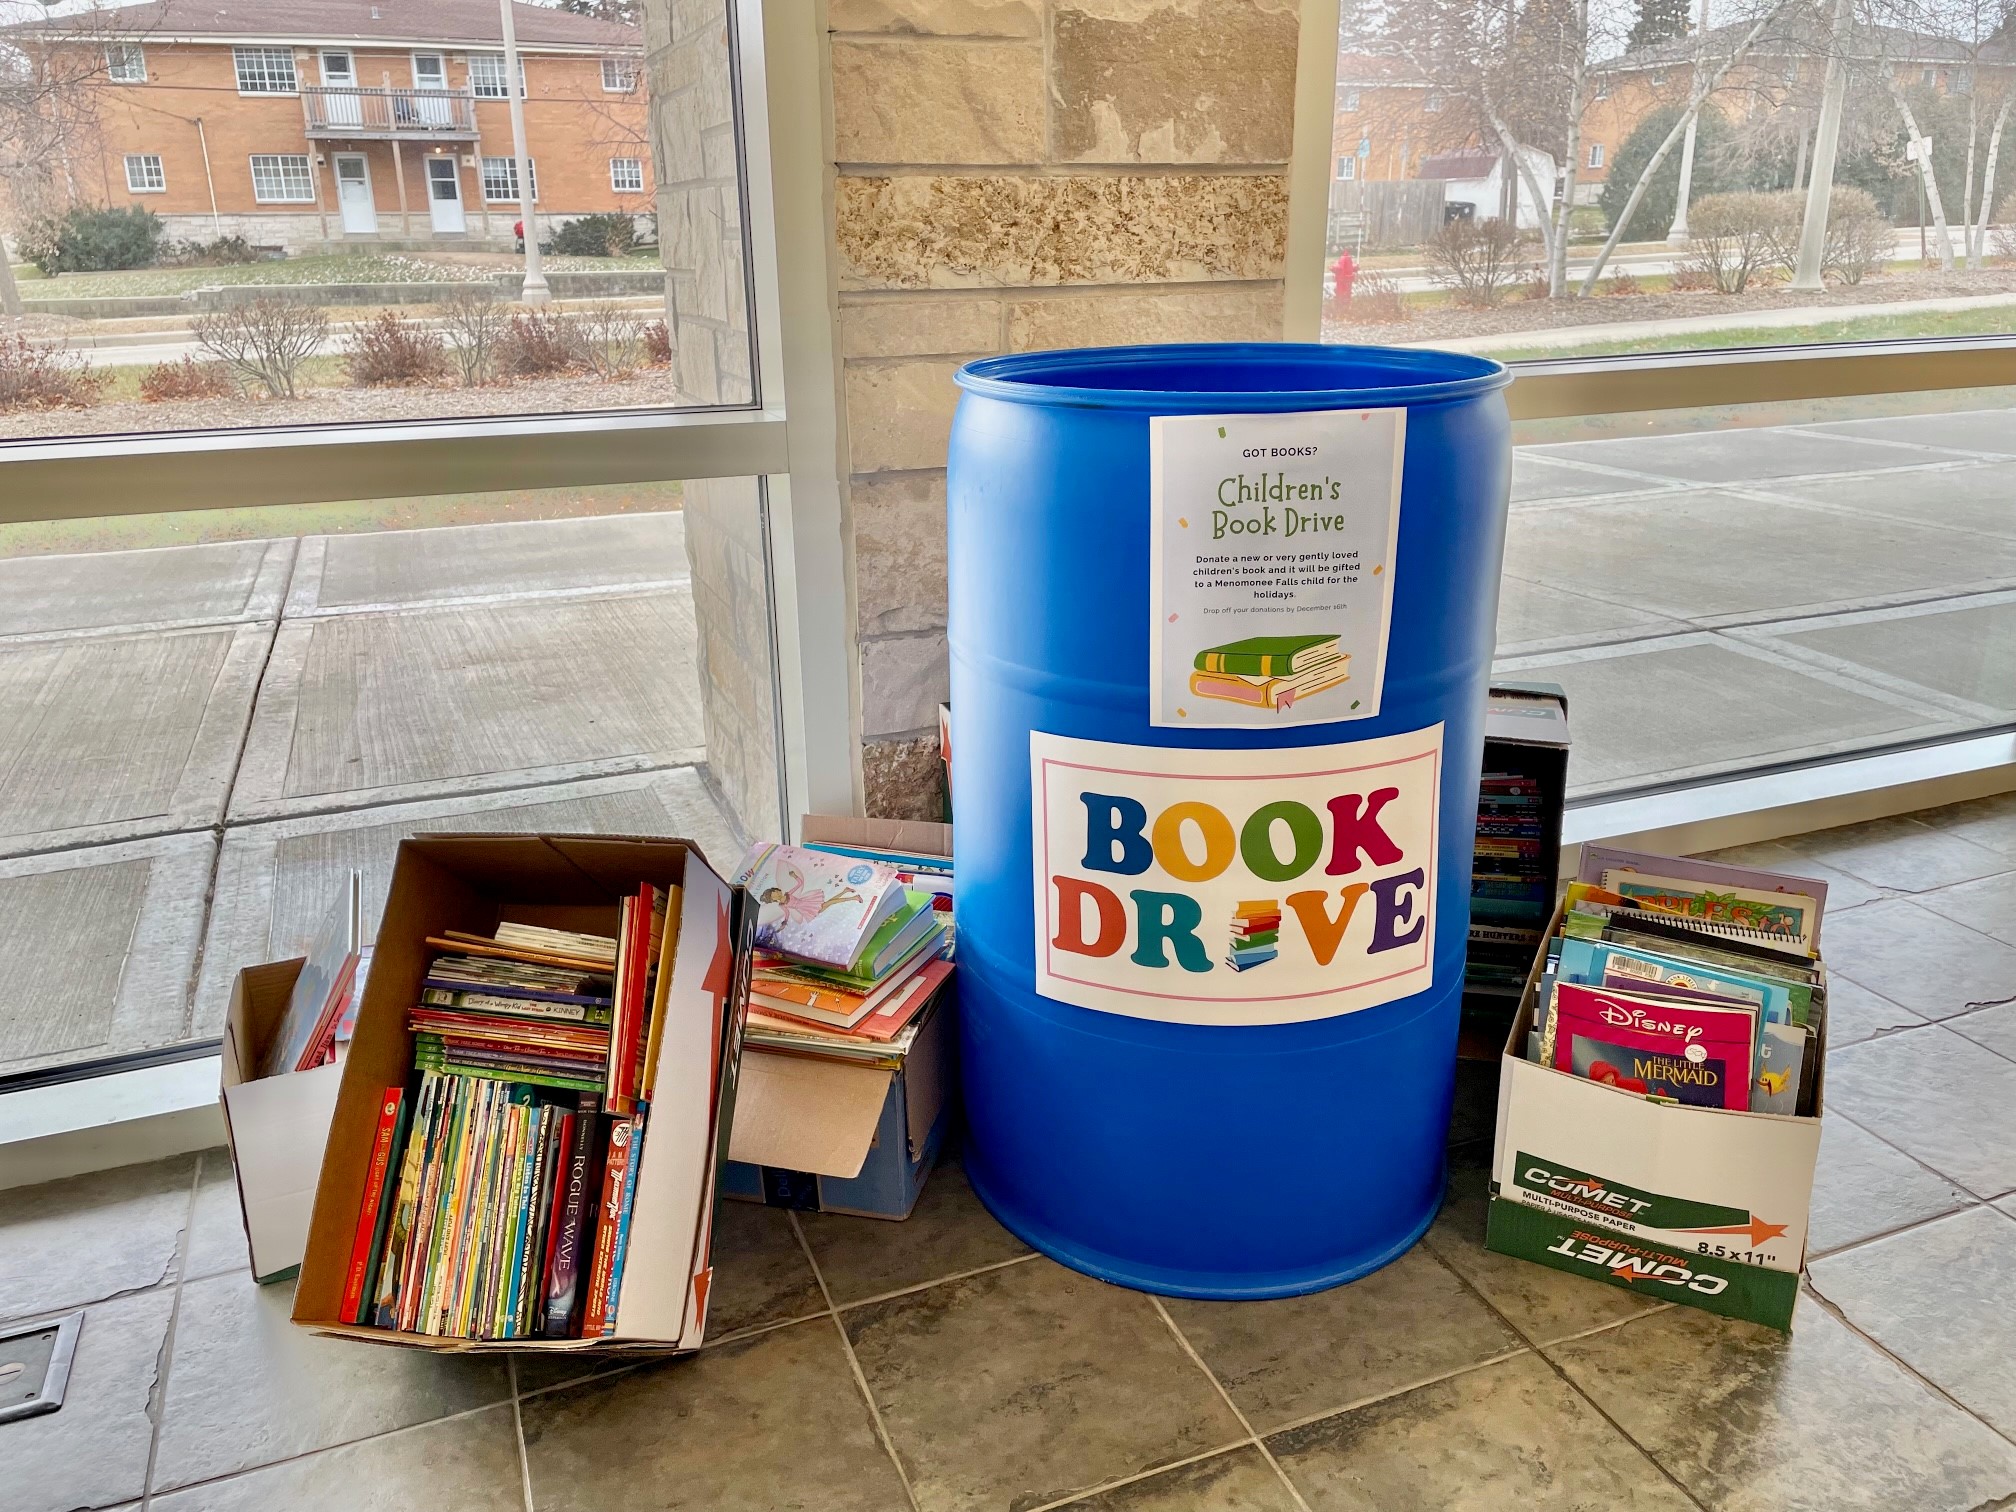 Barrel with sign that says "Book Drive." Boxes of books sit next to barrel on the floor.